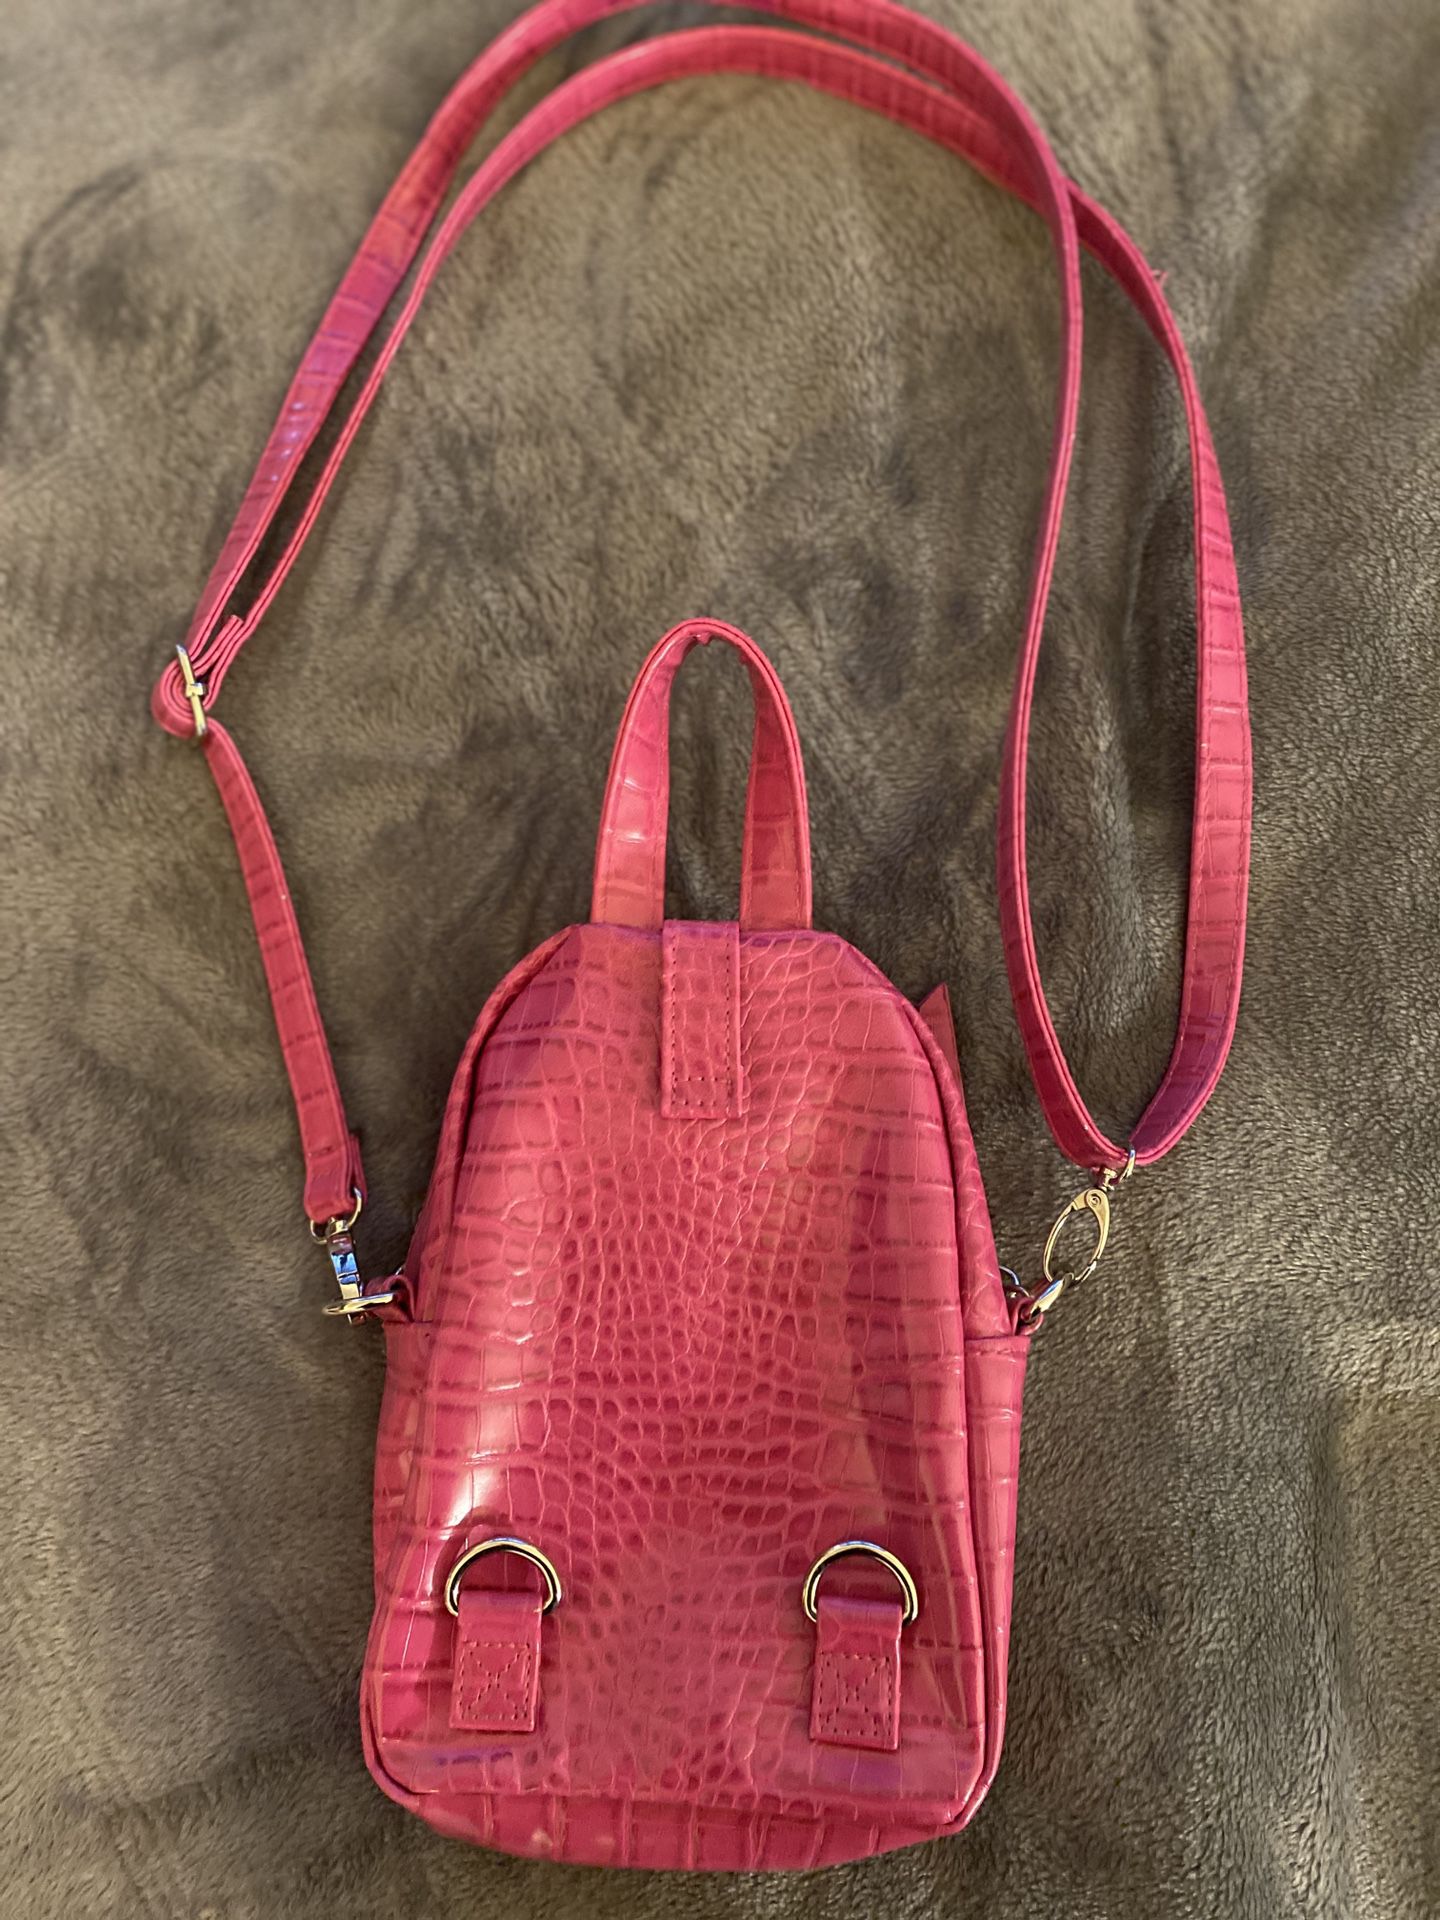 Pink Backpack Or Purse